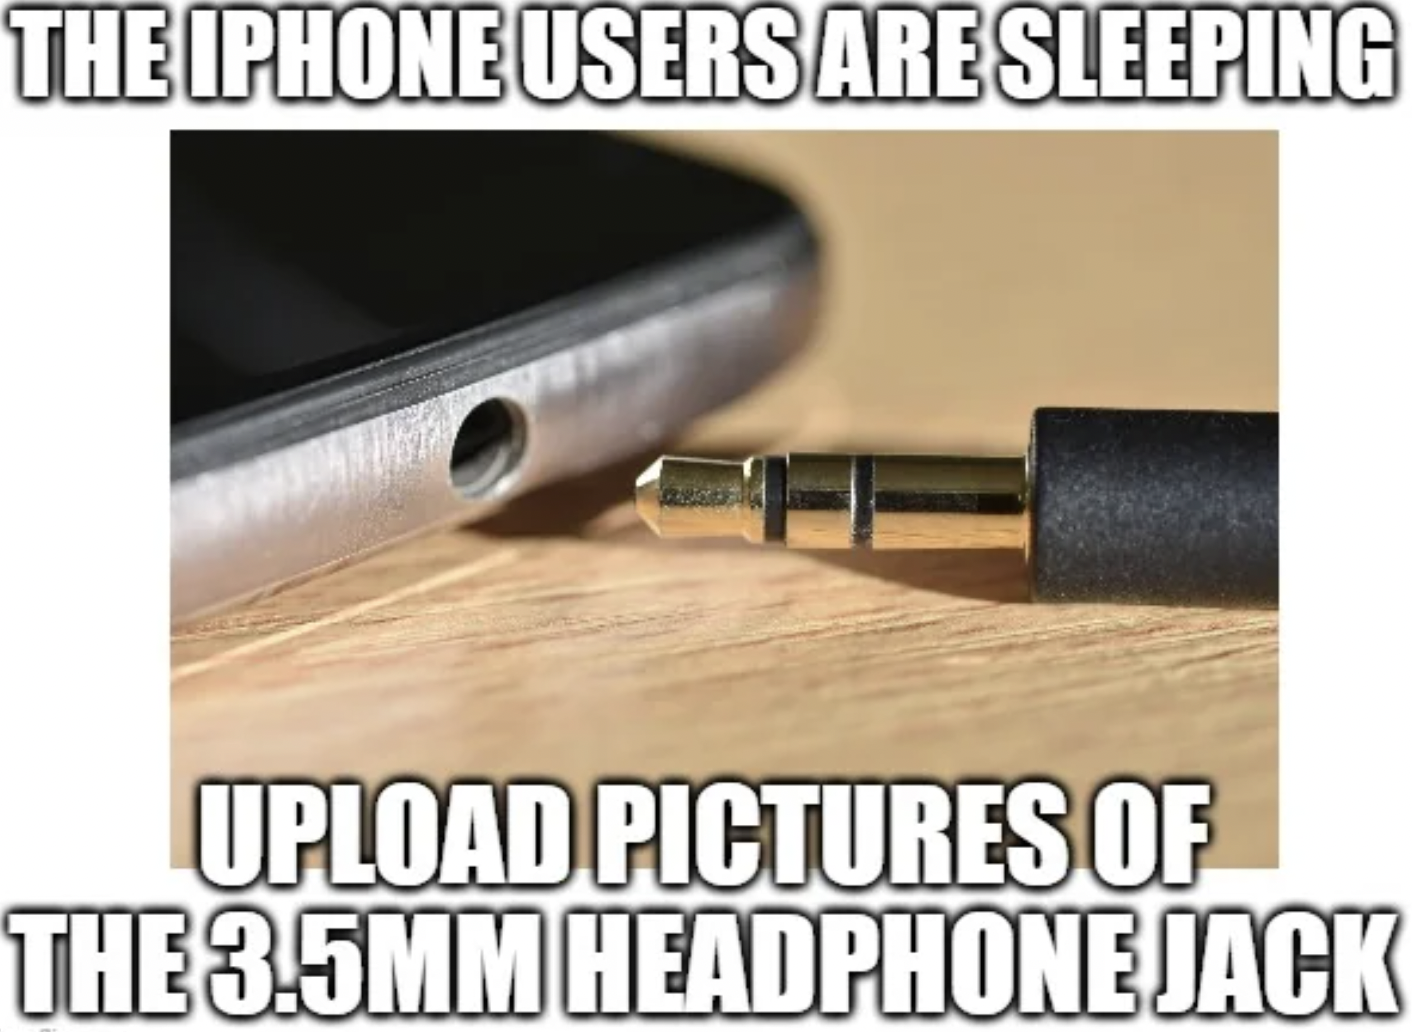 iphone - The Iphone Users Are Sleeping Upload Pictures Of The 3.5MM Headphone Jack